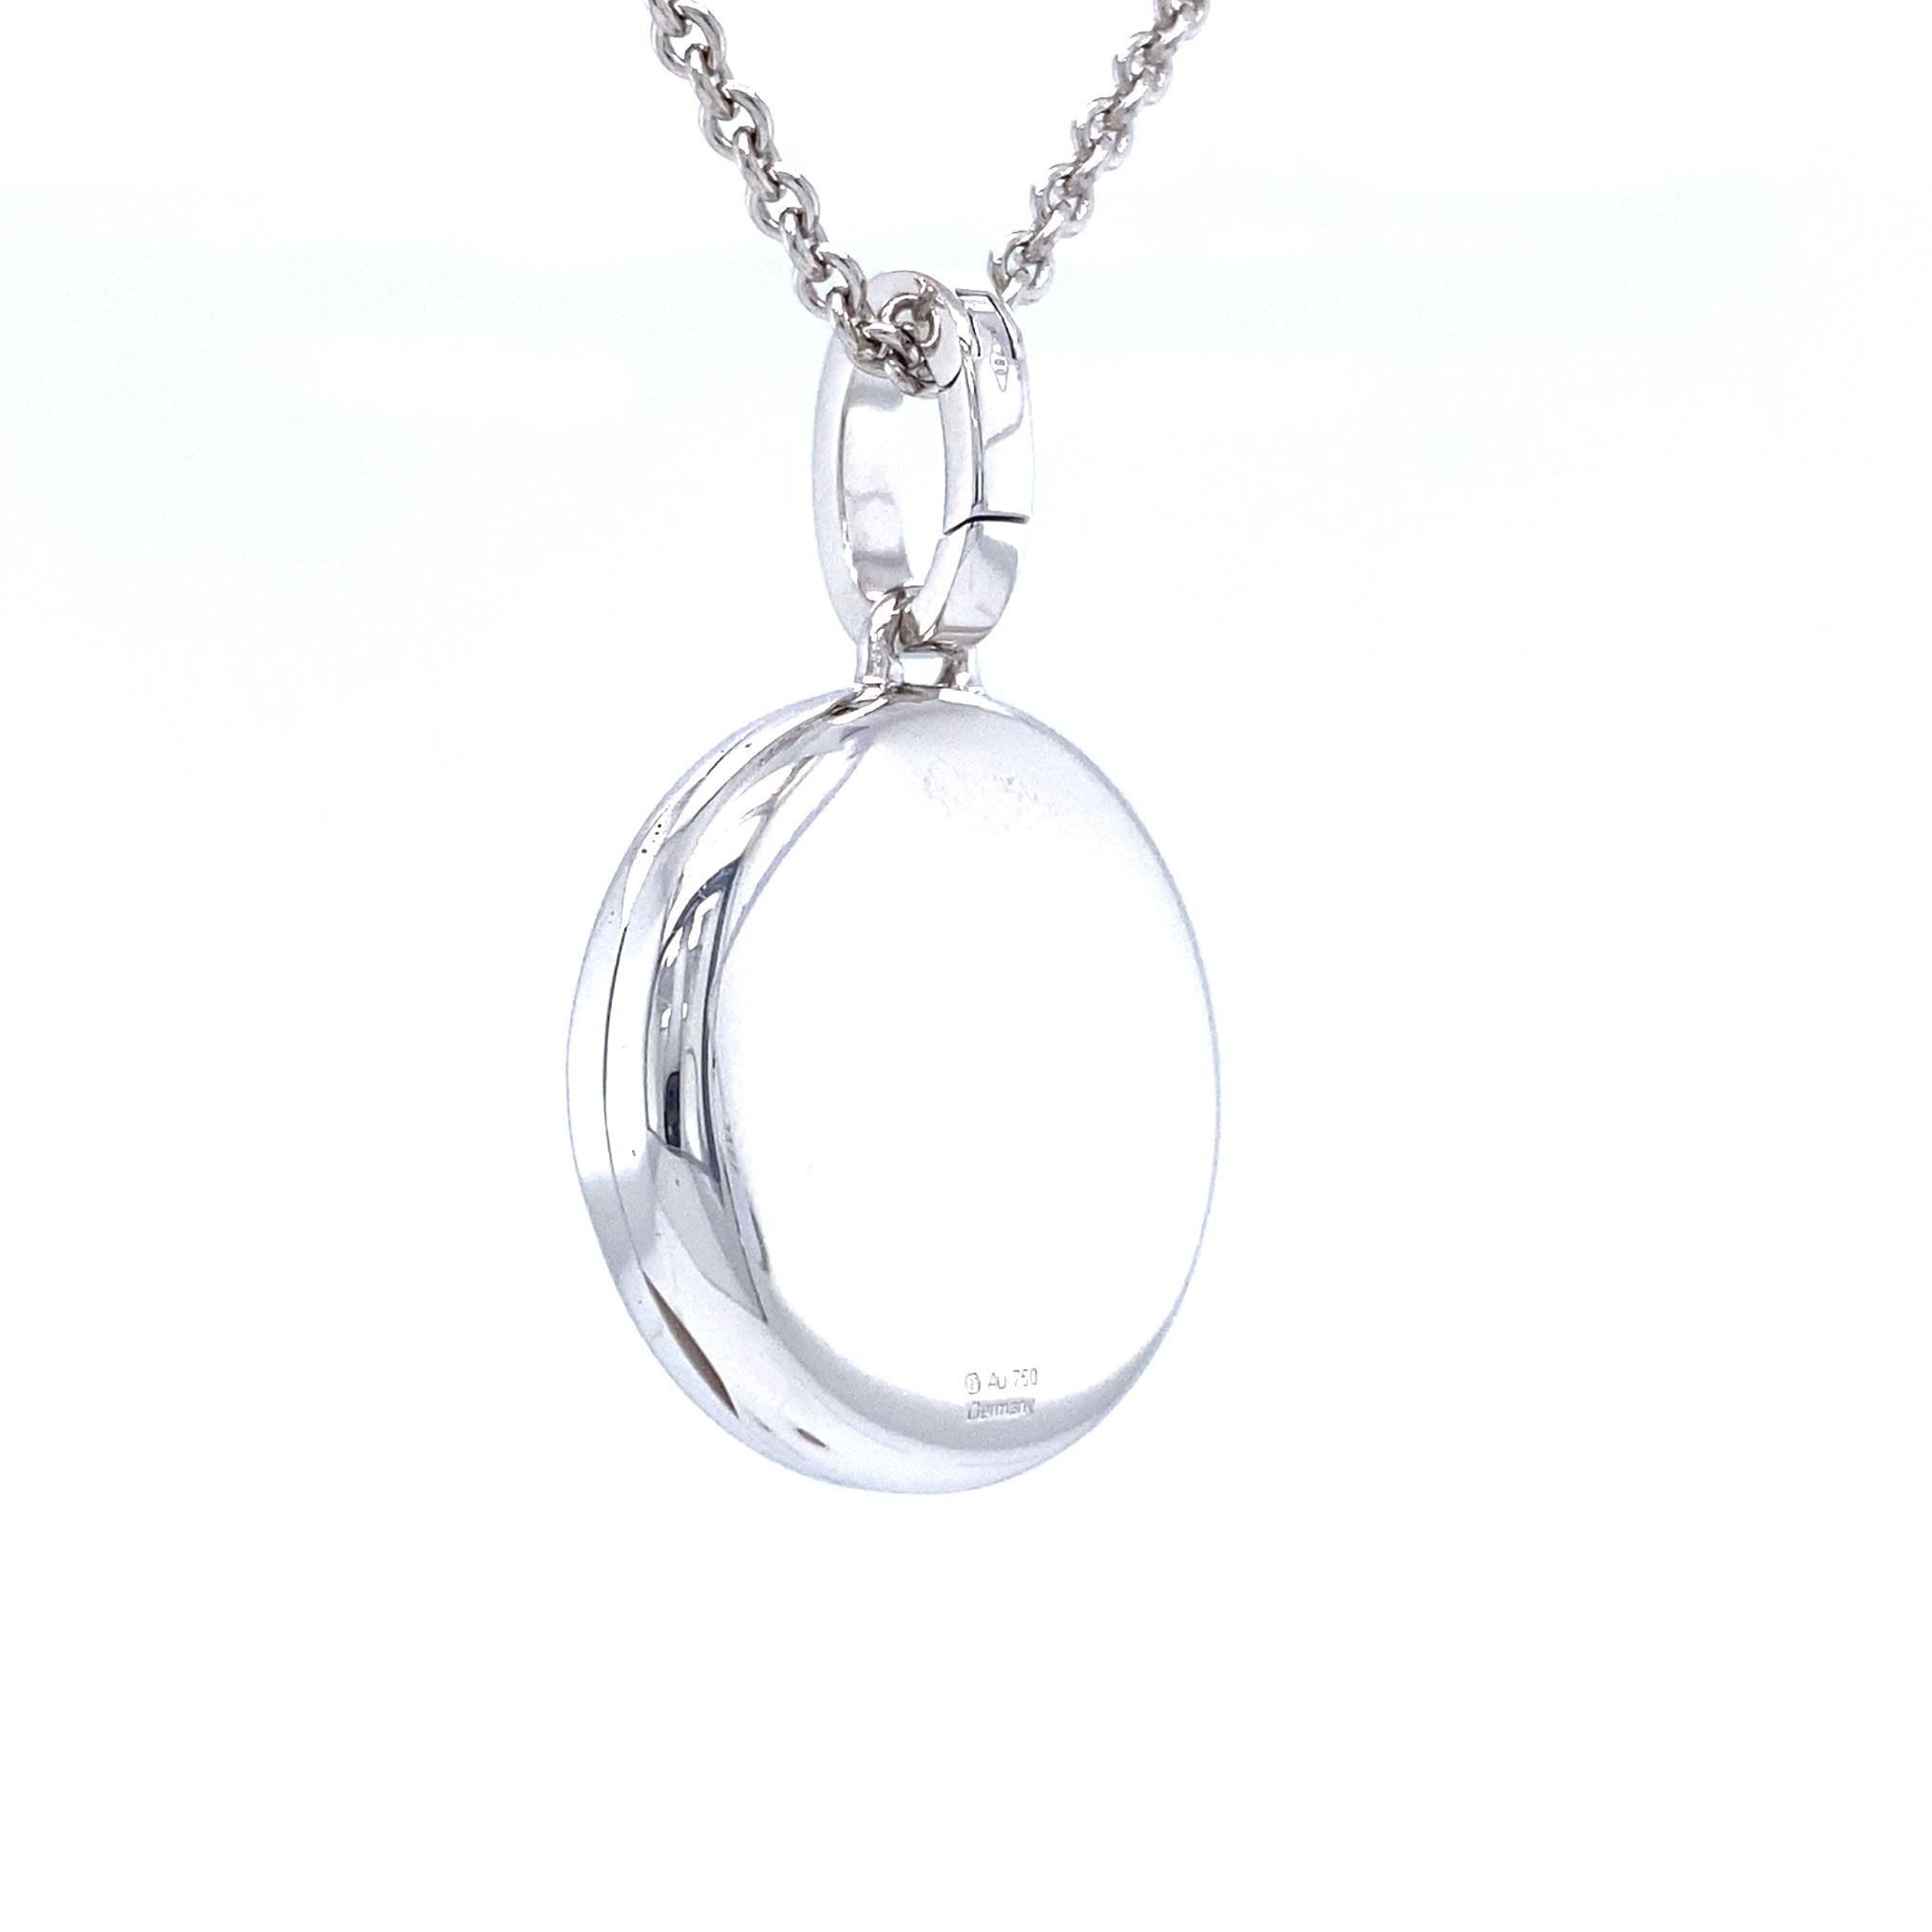 Contemporary Round Customizable Polished Pendant Locket - 18k White Gold - Diameter 21.0 mm For Sale